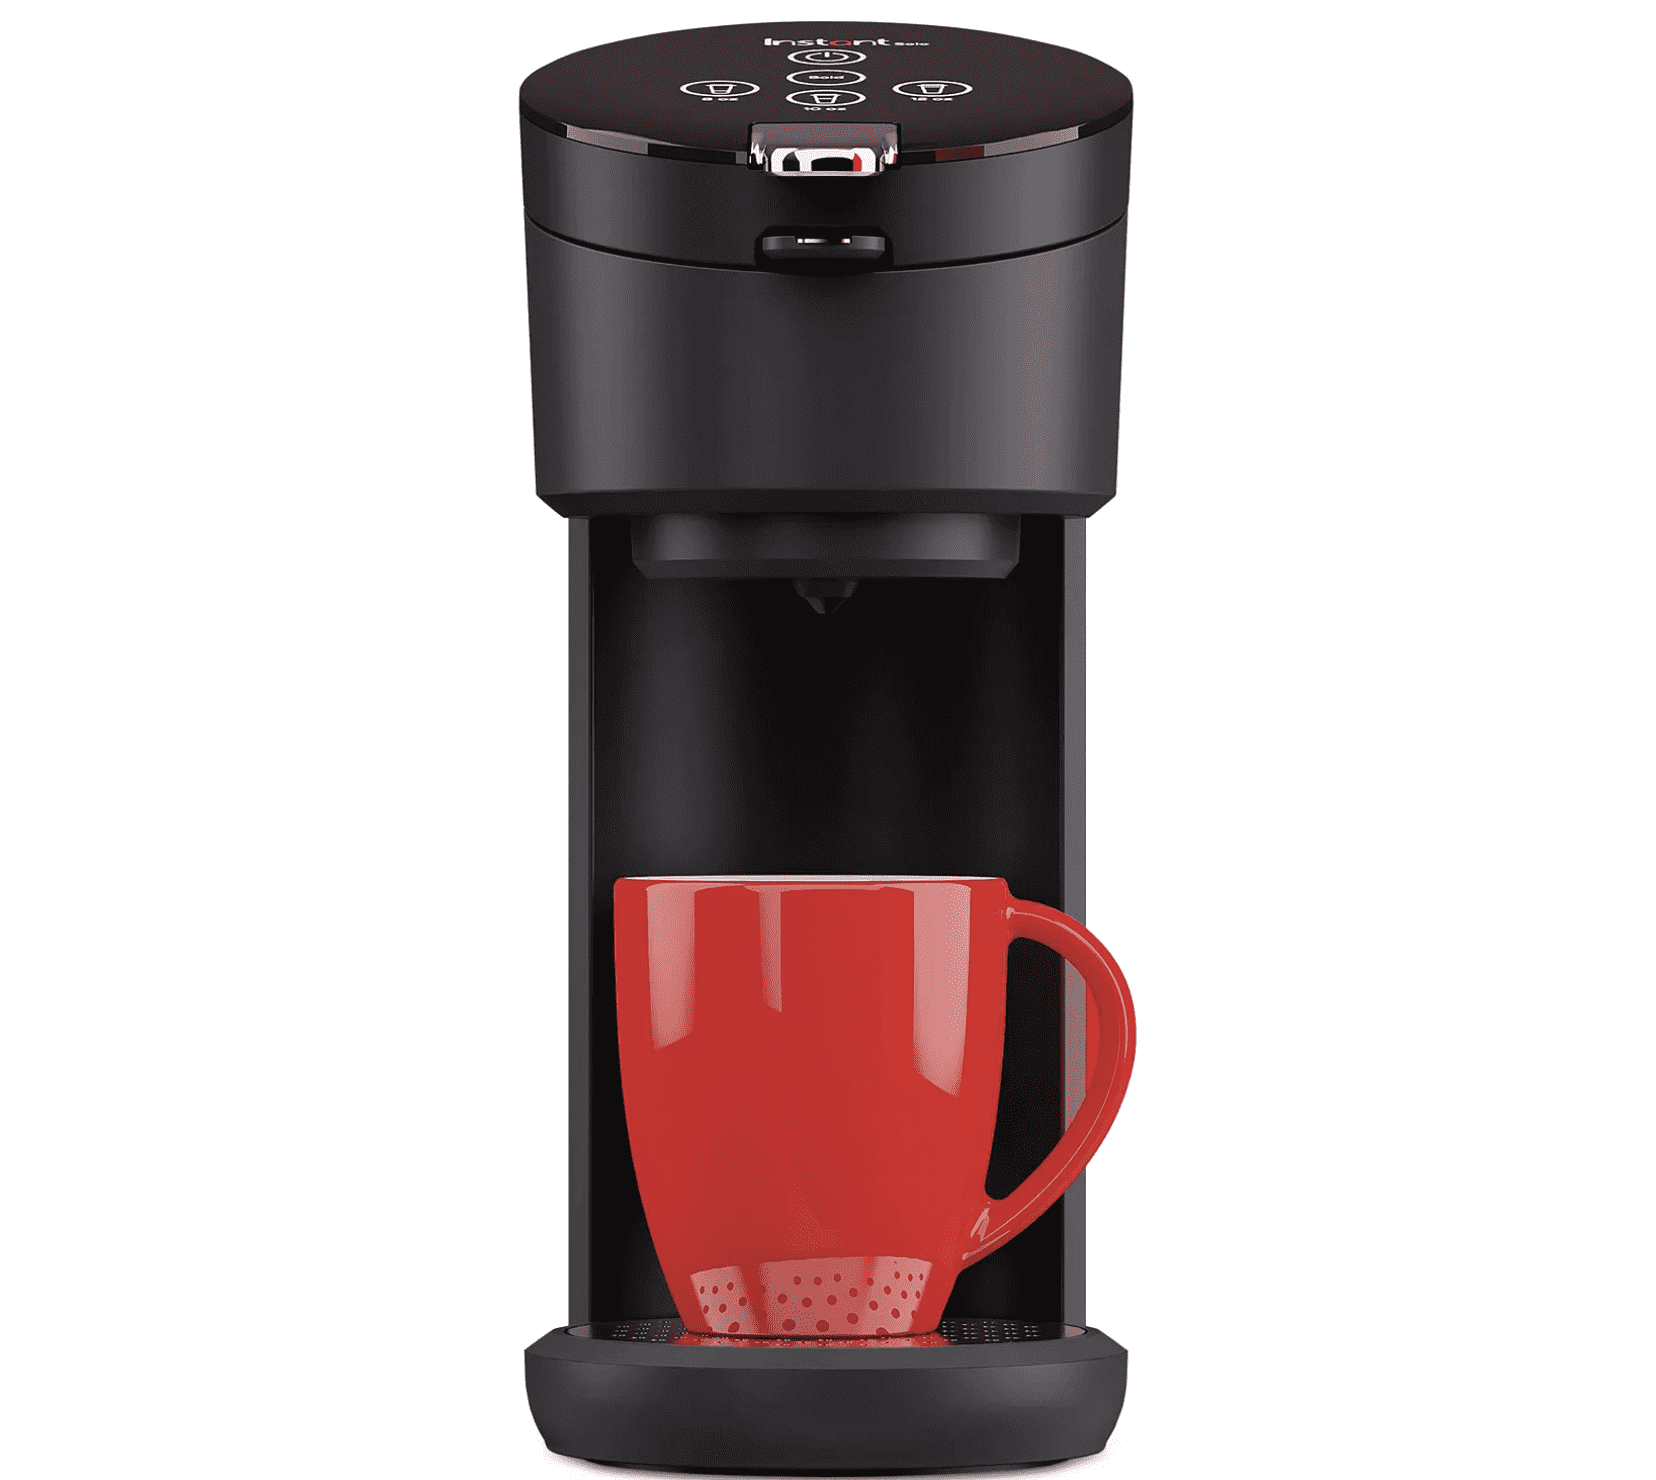 http://cdn.apartmenttherapy.info/image/upload/v1677168490/commerce/Macys-Instant-Pot-Solo-Coffee-Maker.png